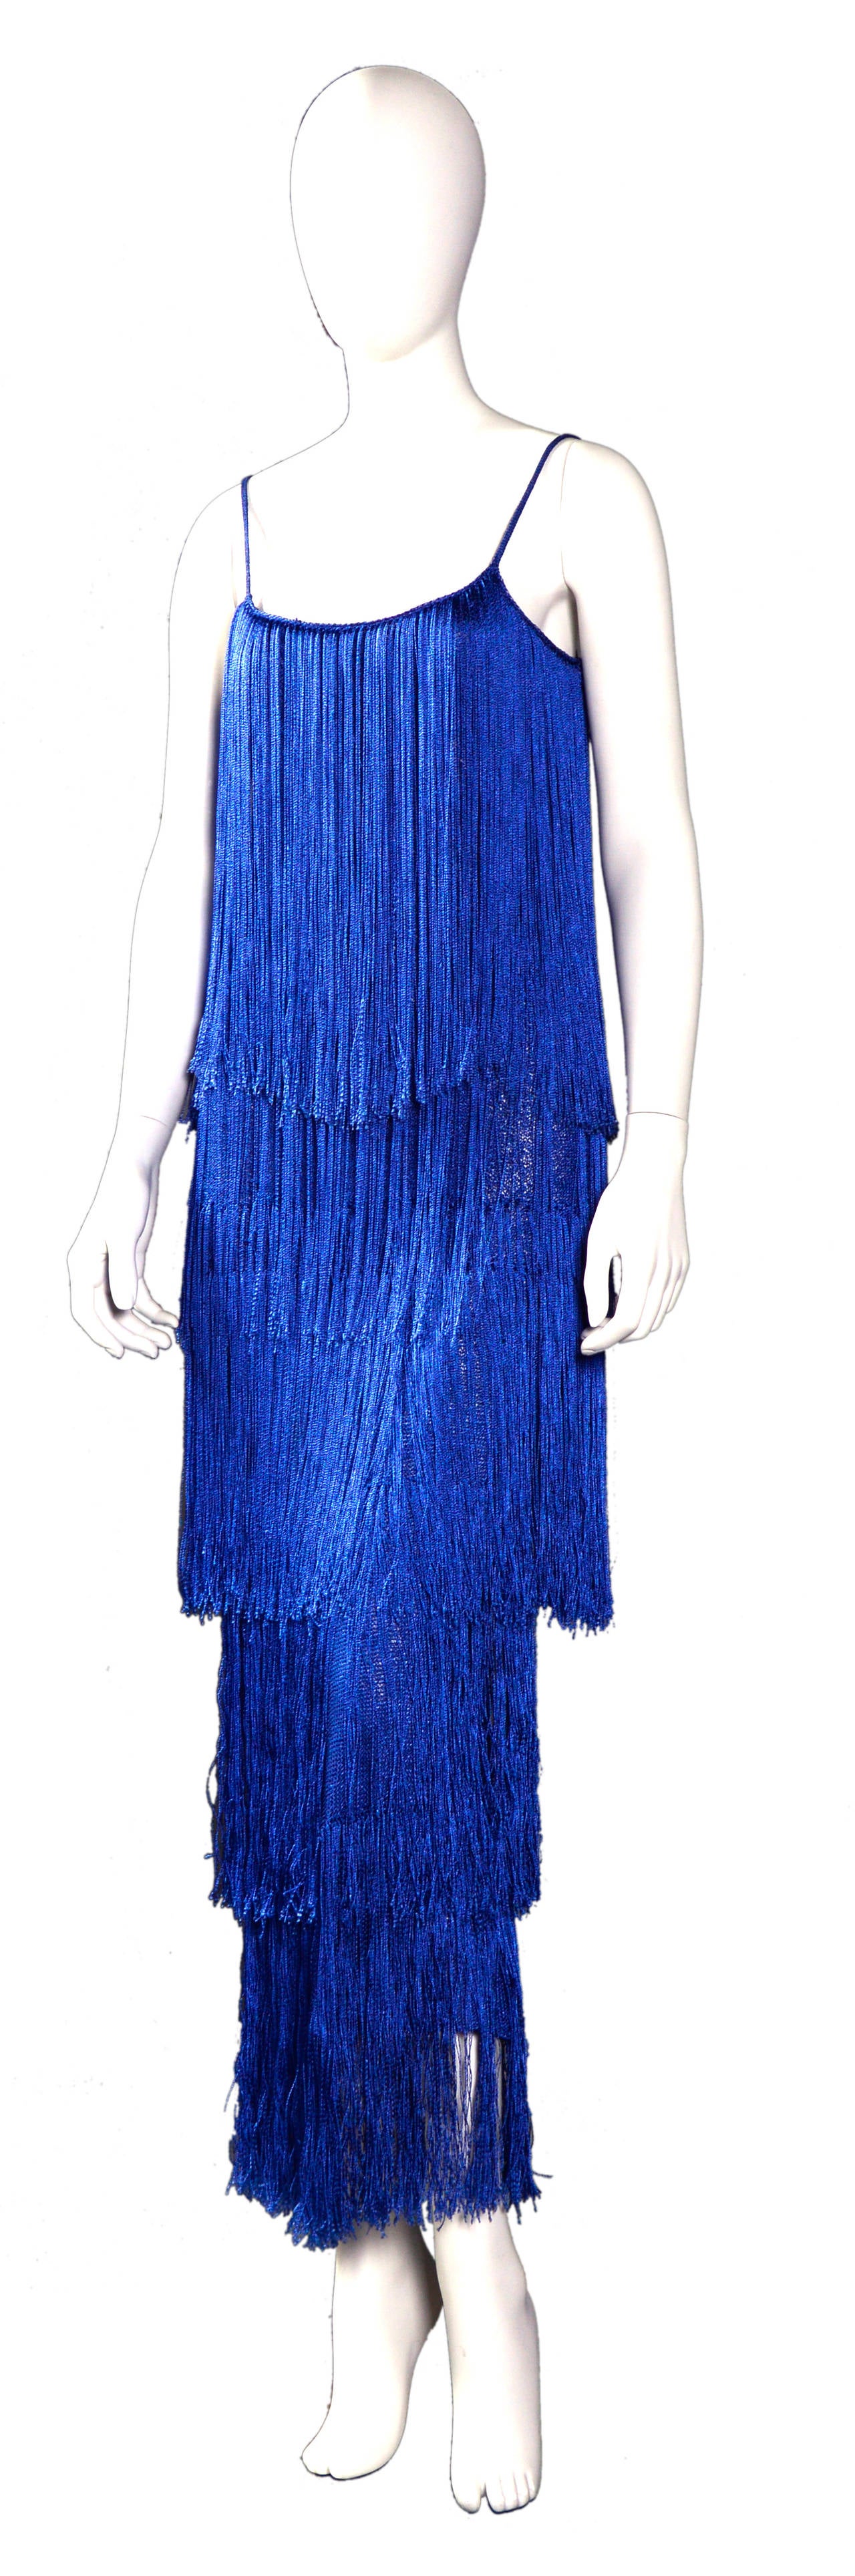 Gorgeous 70's Bleu fringed knit dress by Ann Salens but no label.
The extra layer under the fringed layer gives a heavy & perfect fit to the dress.
Size Small or extra small